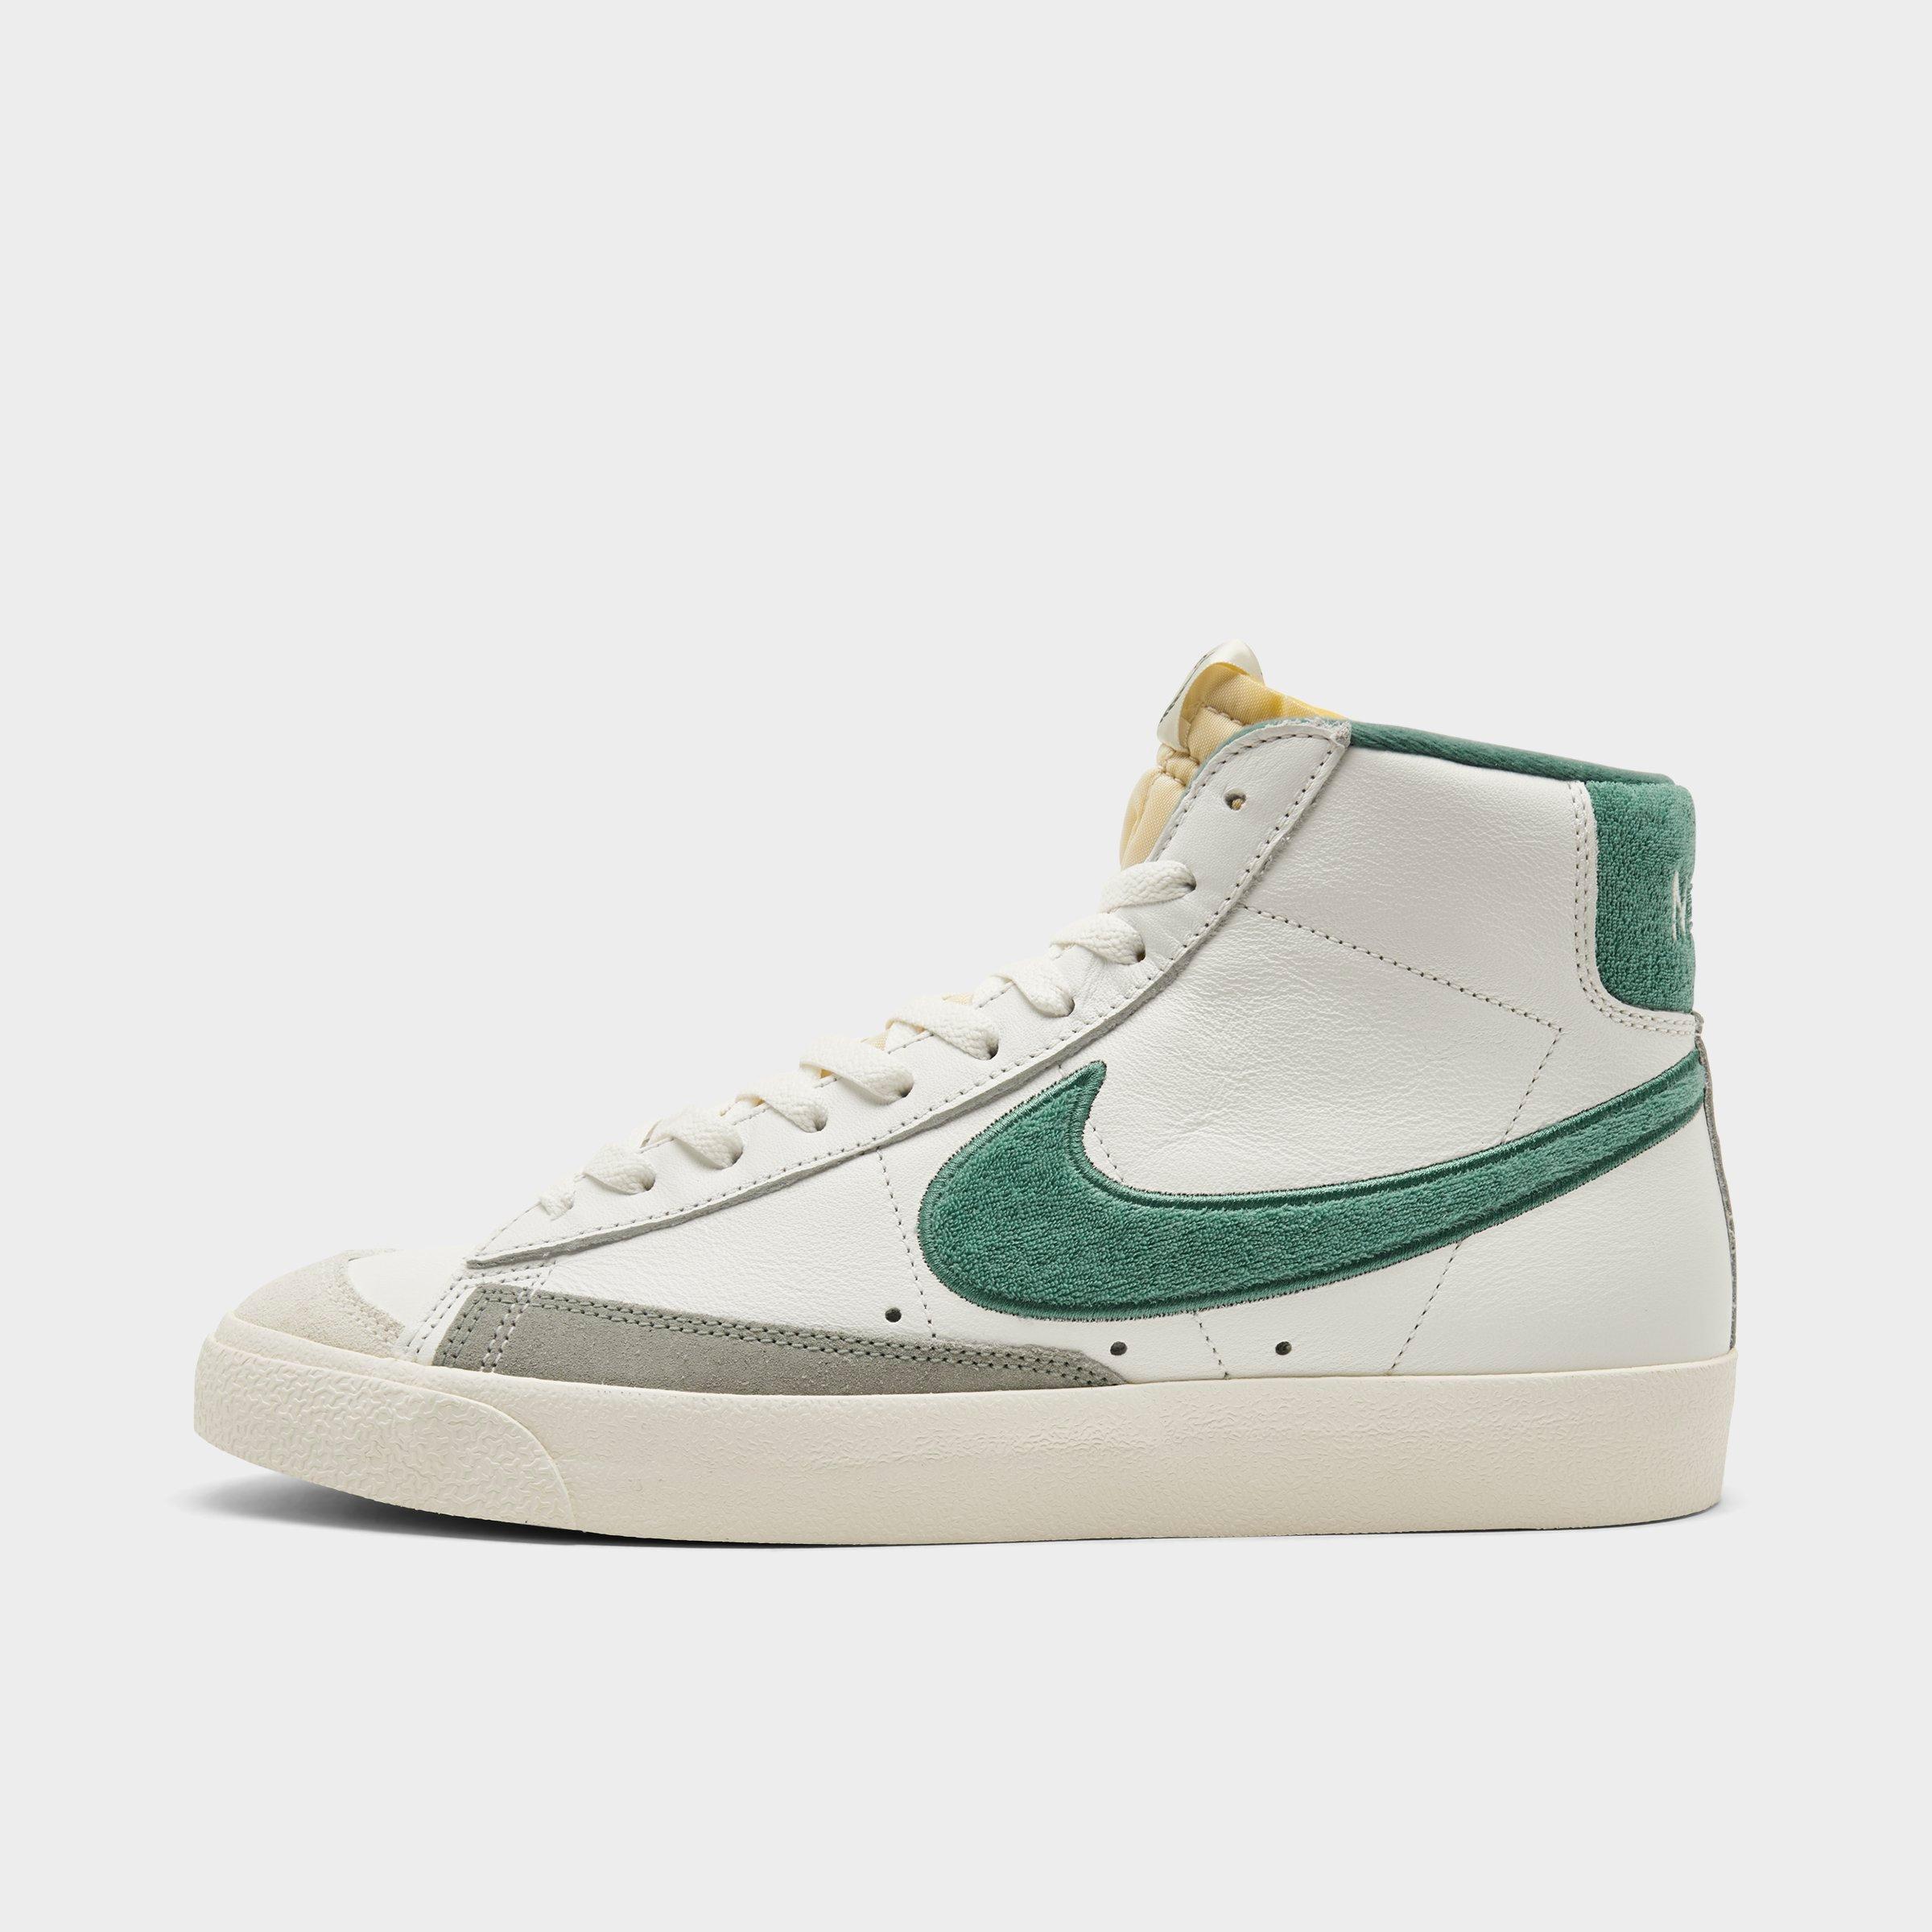 Nike Men's Blazer Mid '77 Premium Resort And Sport Casual Shoes In White